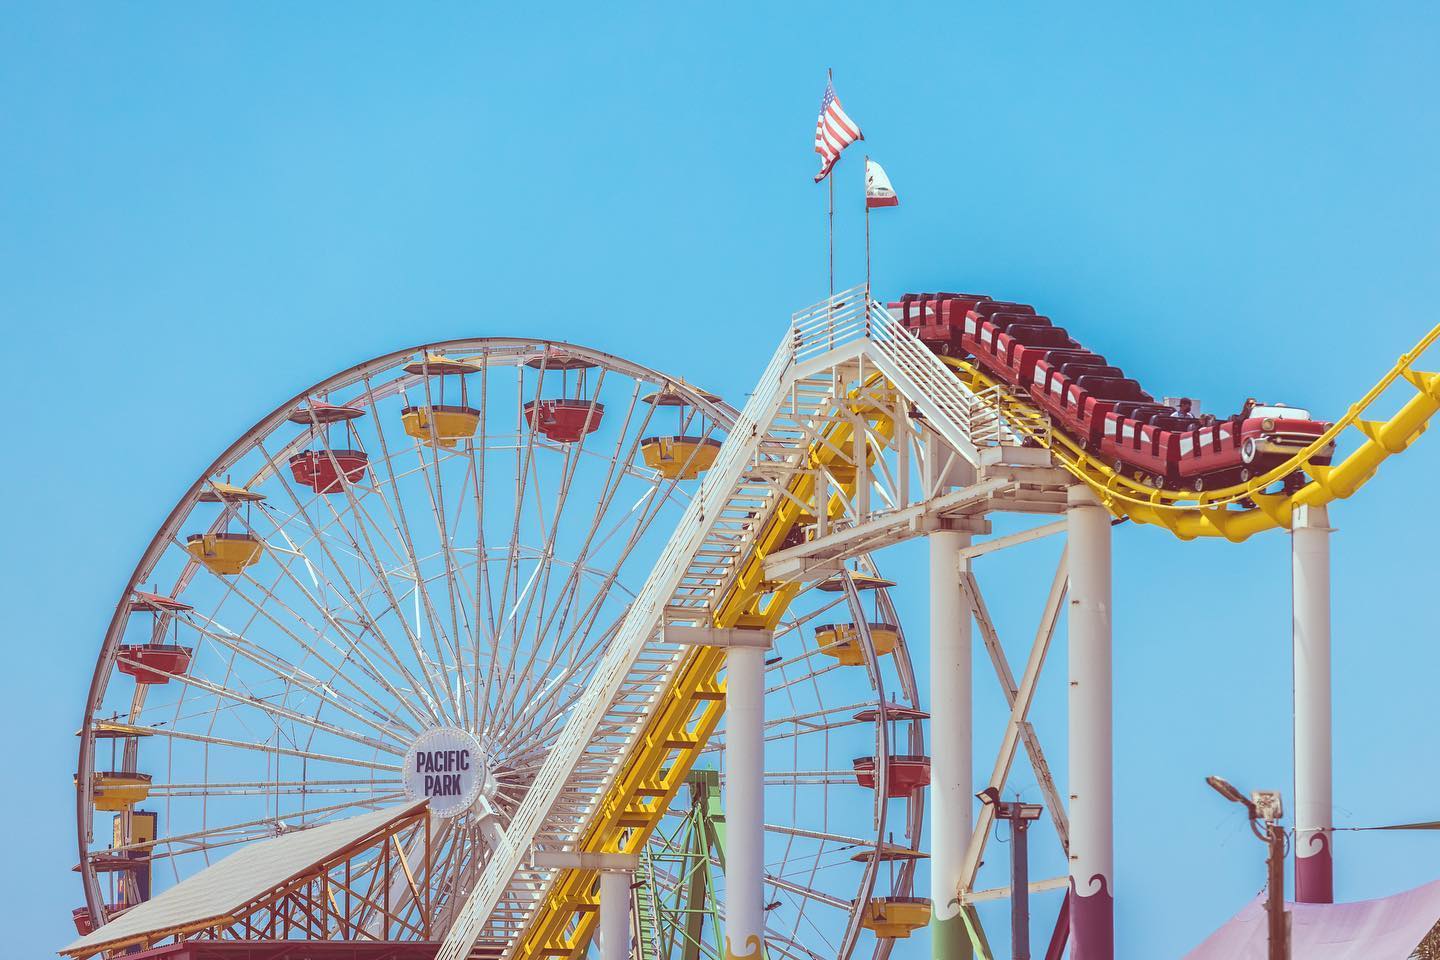 It's officially summer and we couldn't be more excited! 😎  📸: @devindilmore
.
.
.
#santamonica #santamonicapier #pacpark #pacificpark #santamonicaphotography #discoverla #discoverlosangeles #travel #californialove #summer #summervibes